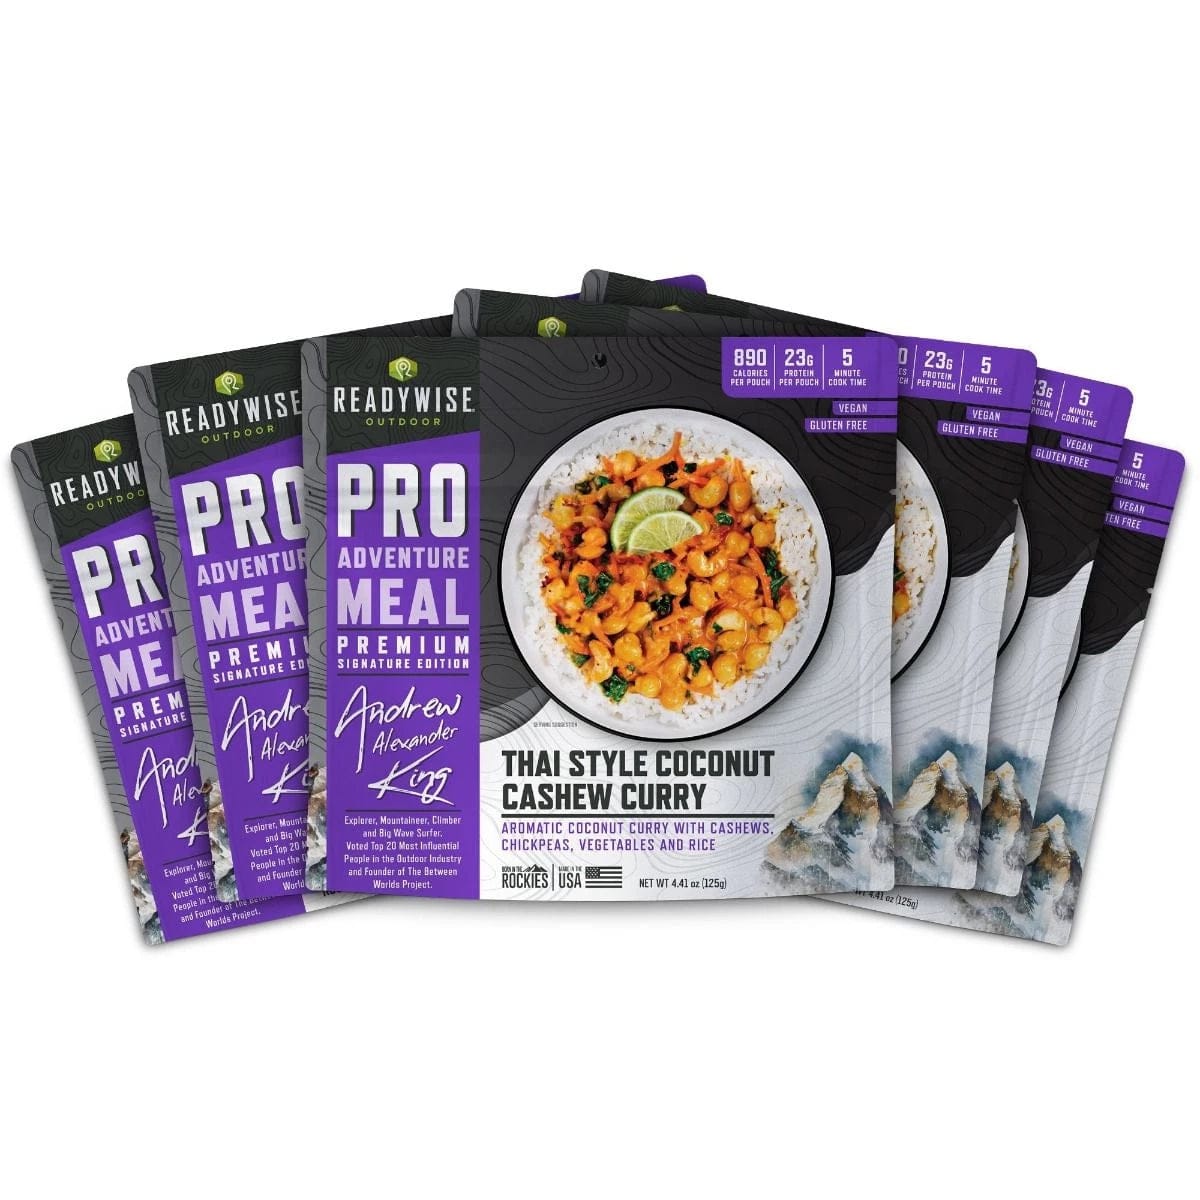 ReadyWise Thai Coconut Cashew Curry: Vegan Outdoor Pro Adventure Meal 6-Pack for Hiking & Camping